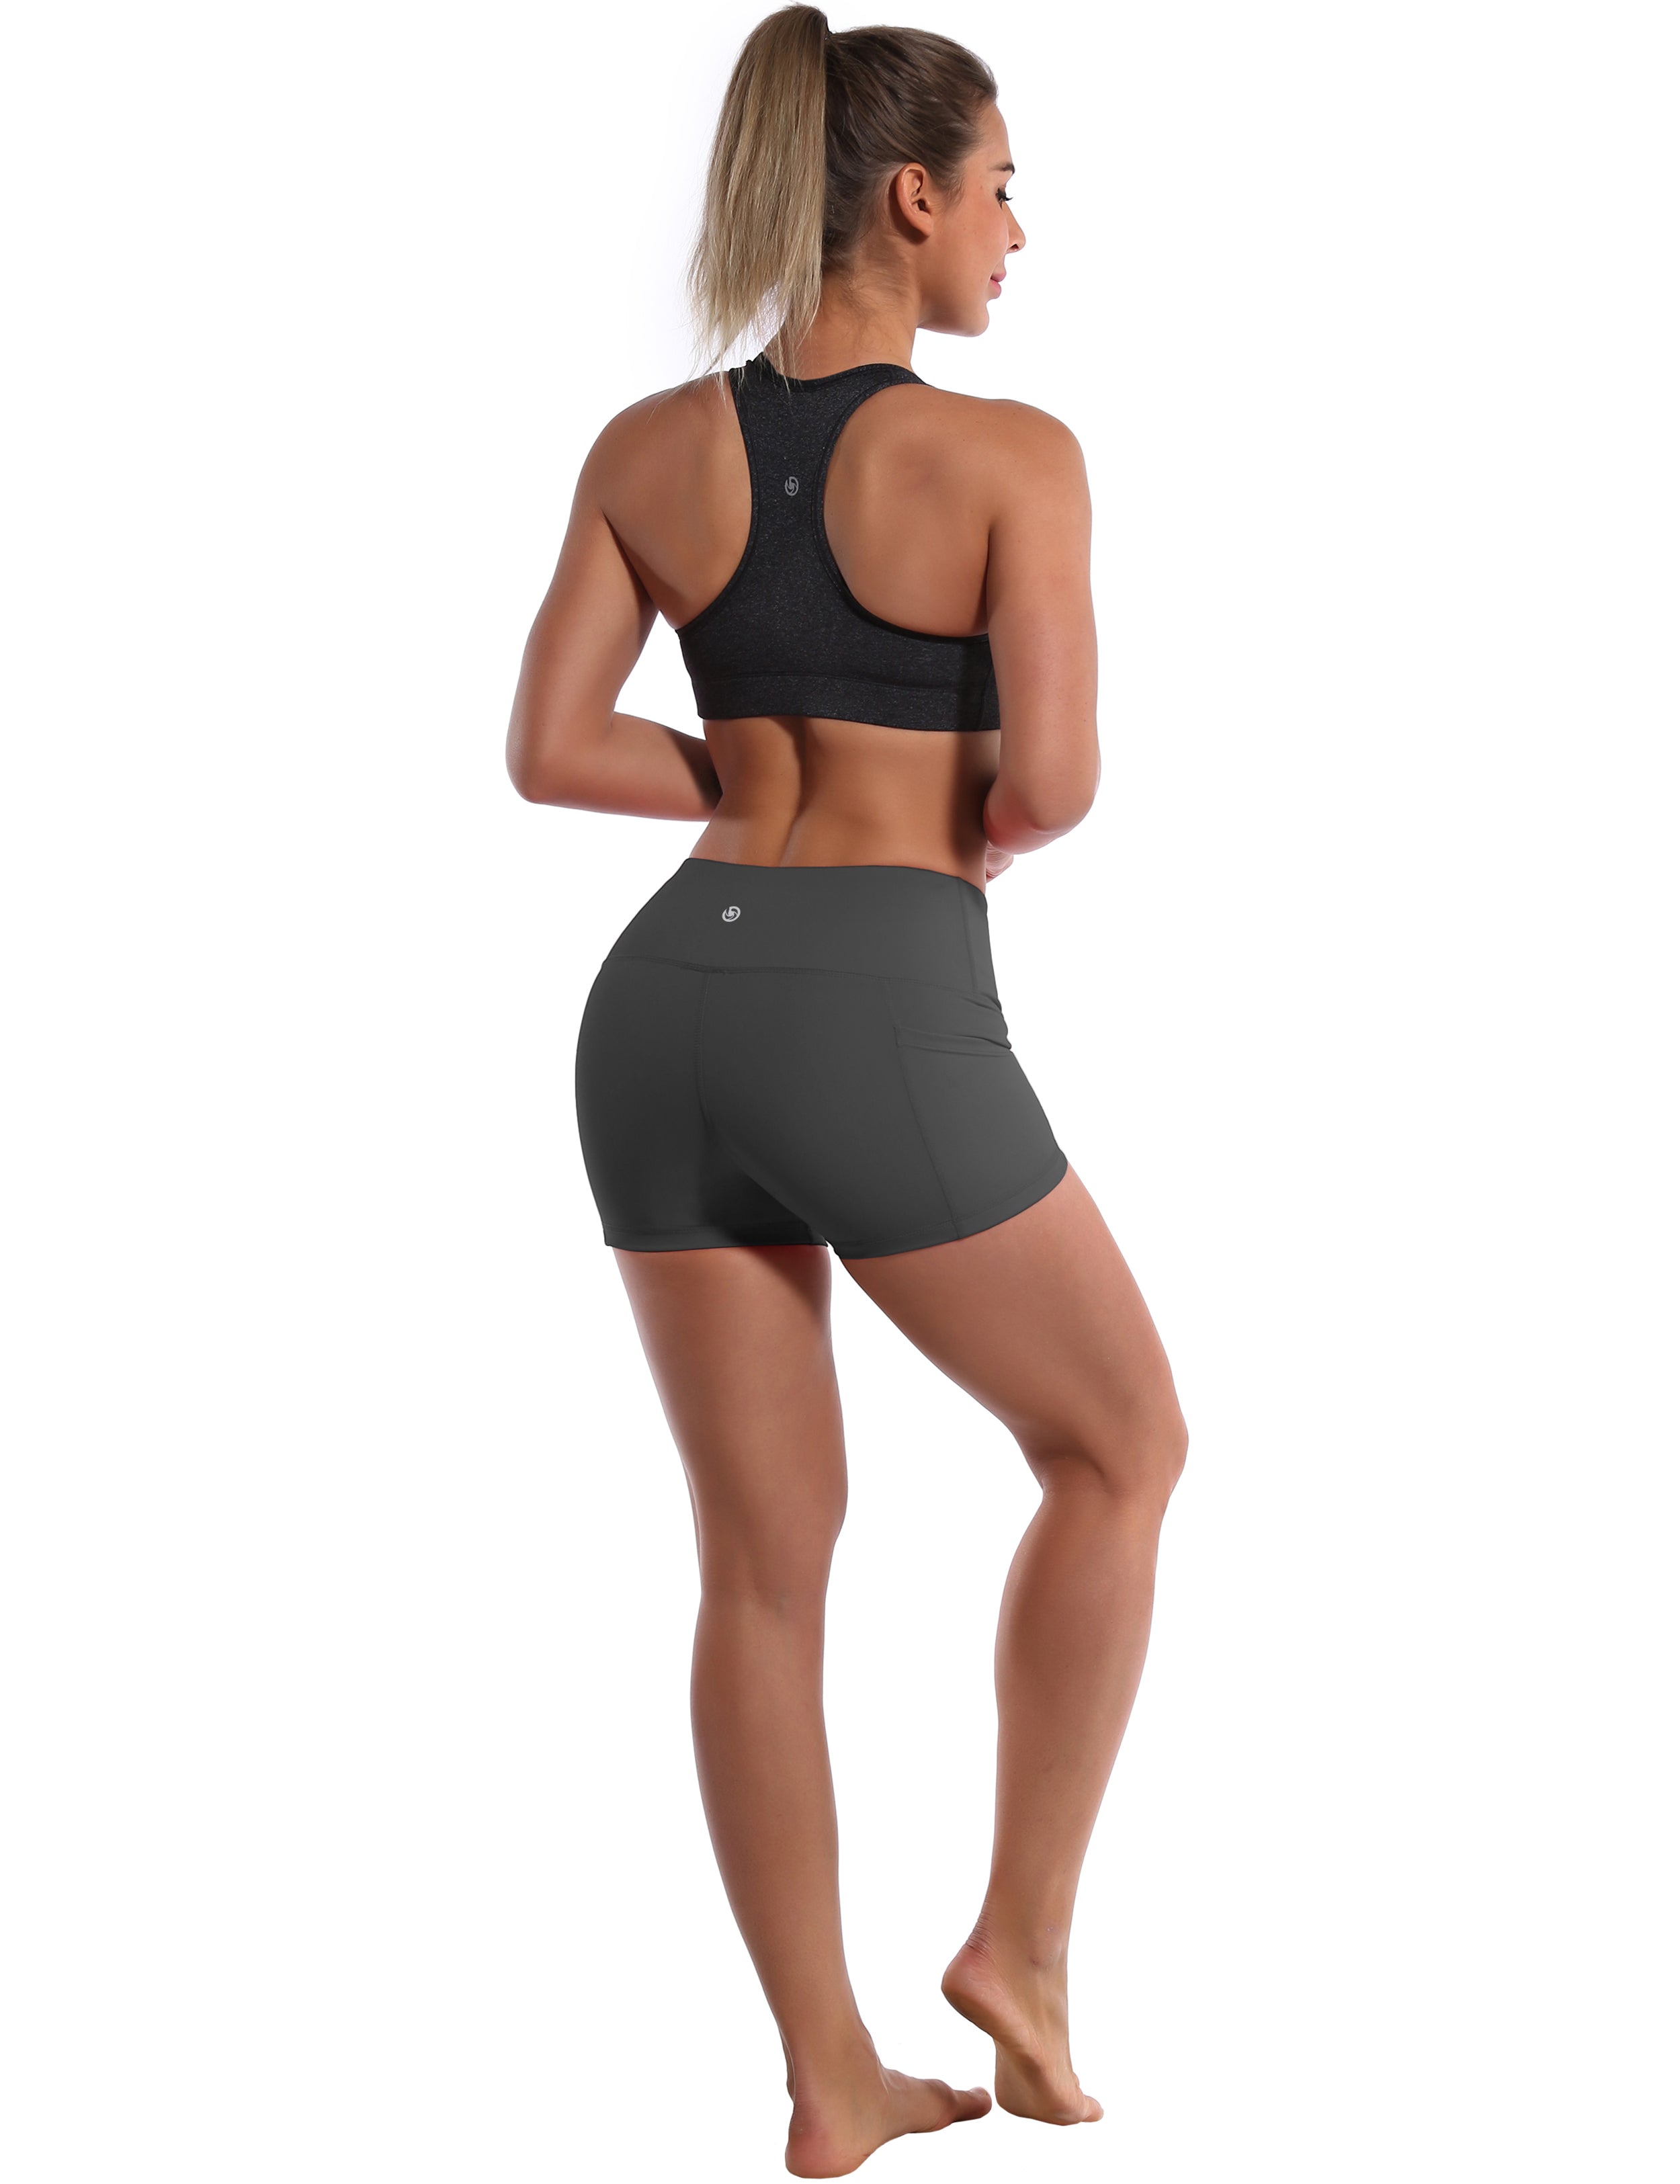 2.5" Side Pockets Jogging Shorts shadowcharcoal Sleek, soft, smooth and totally comfortable: our newest sexy style is here. Softest-ever fabric High elasticity High density 4-way stretch Fabric doesn't attract lint easily No see-through Moisture-wicking Machine wash 78% Polyester, 22% Spandex